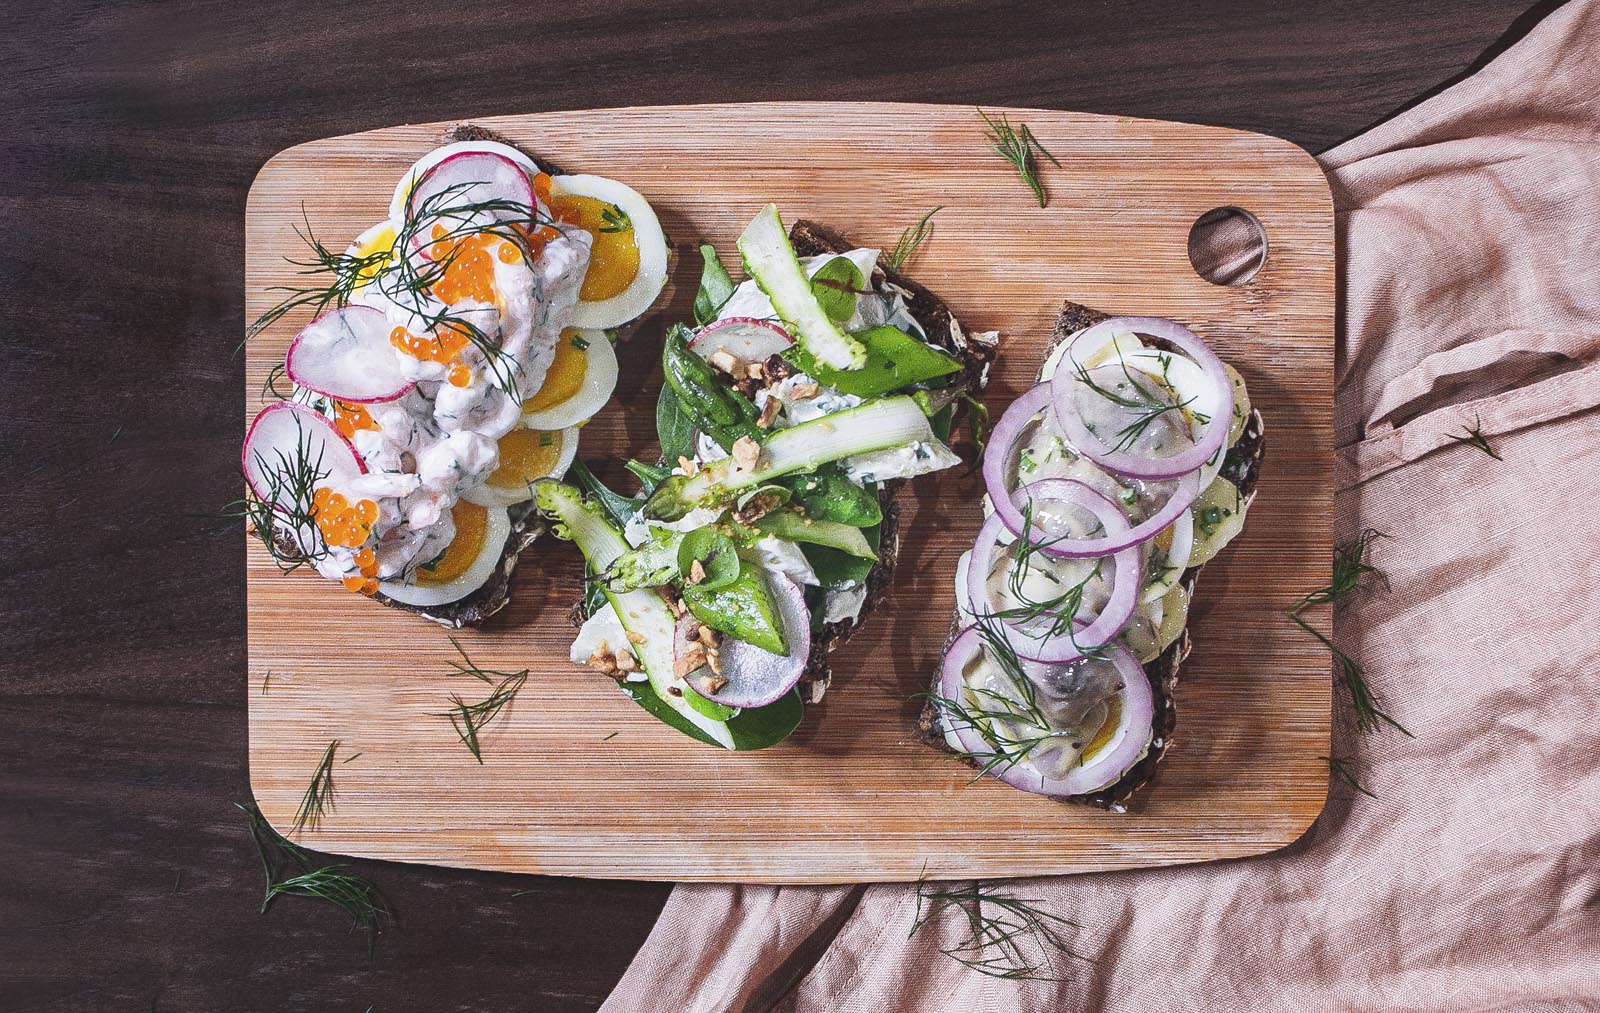 Smorrebrod, an open-faced sandwich offered at Nordic cafe Hjem in Hong Kong